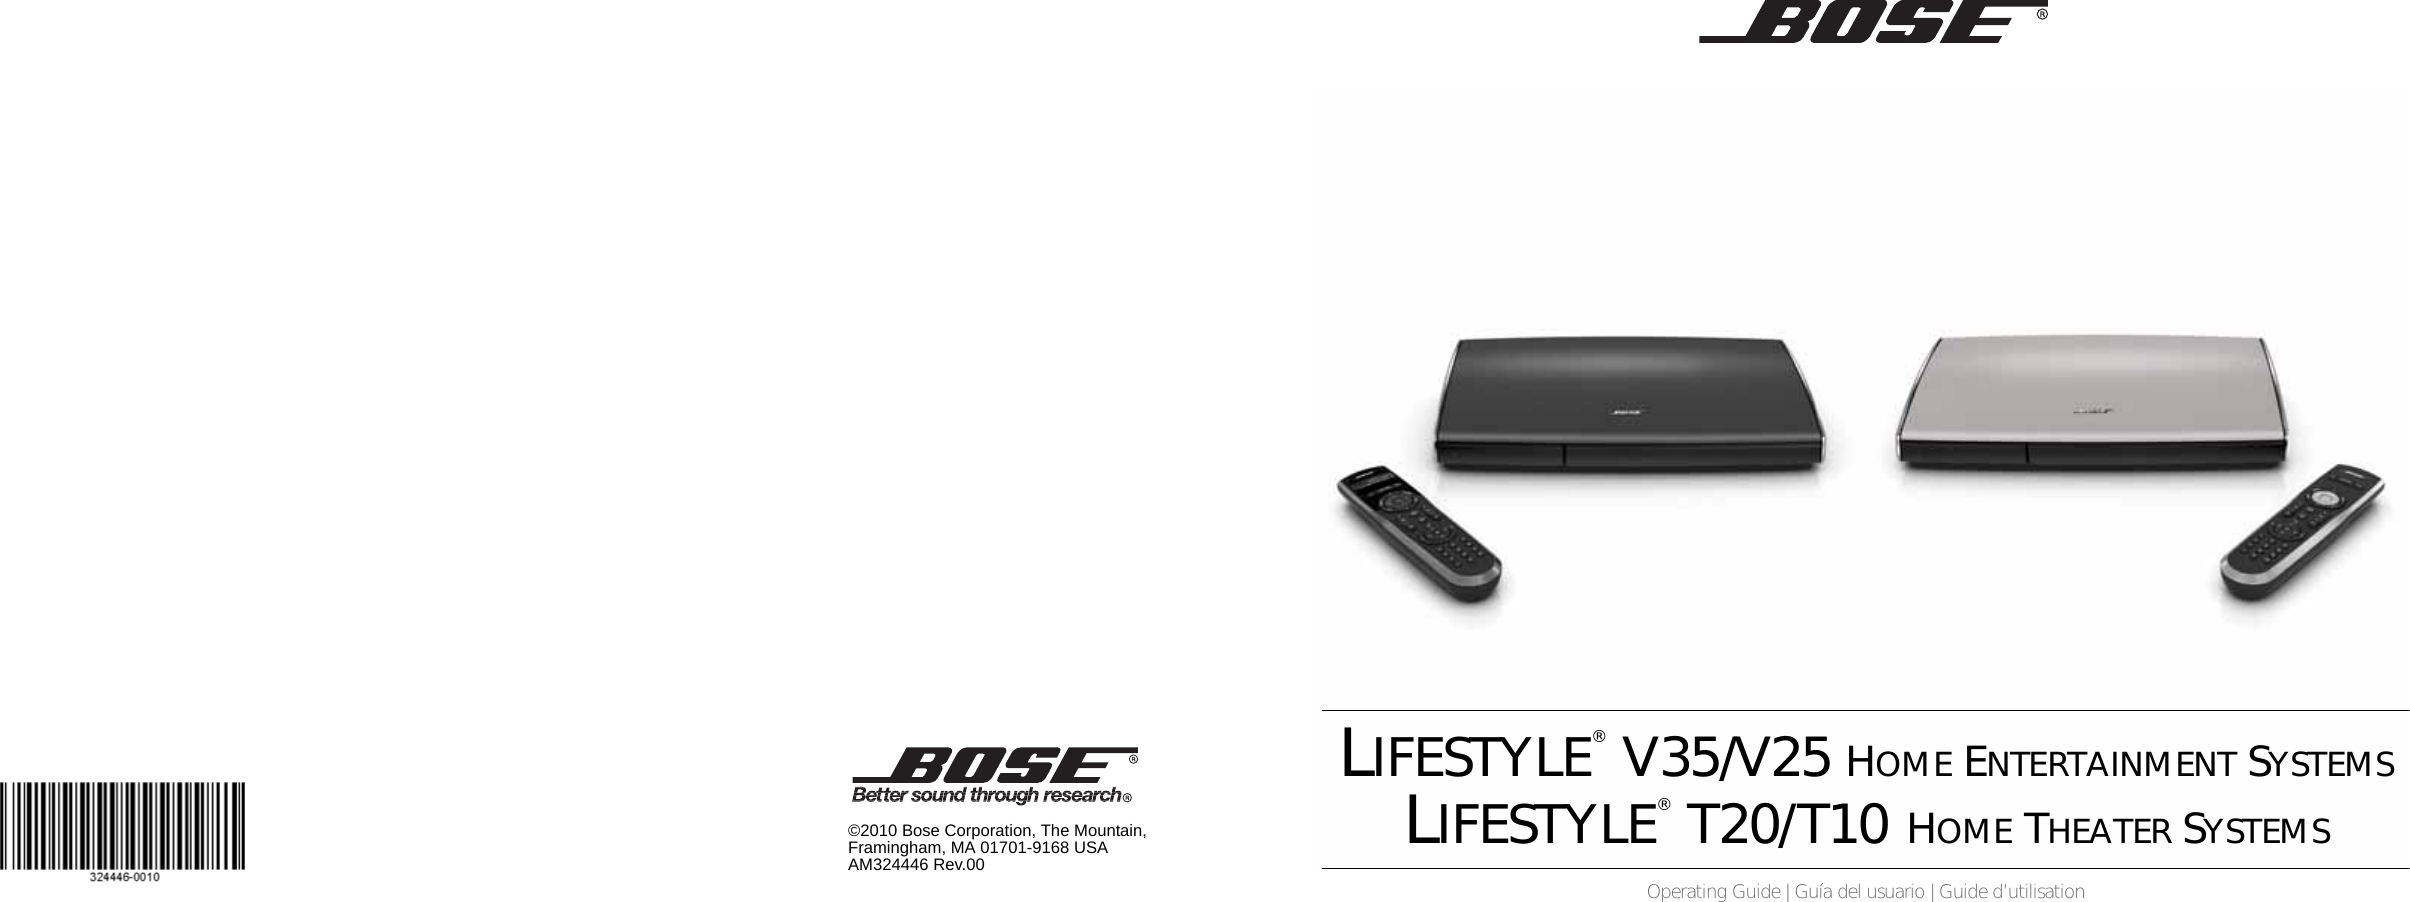 ©2010 Bose Corporation, The Mountain,Framingham, MA 01701-9168 USAAM324446 Rev.00LIFESTYLE® V35/V25 HOME ENTERTAINMENT SYSTEMSLIFESTYLE® T20/ T10 HOME THEATER SYSTEMSOperating Guide | Guía del usuario | Guide d’utilisation